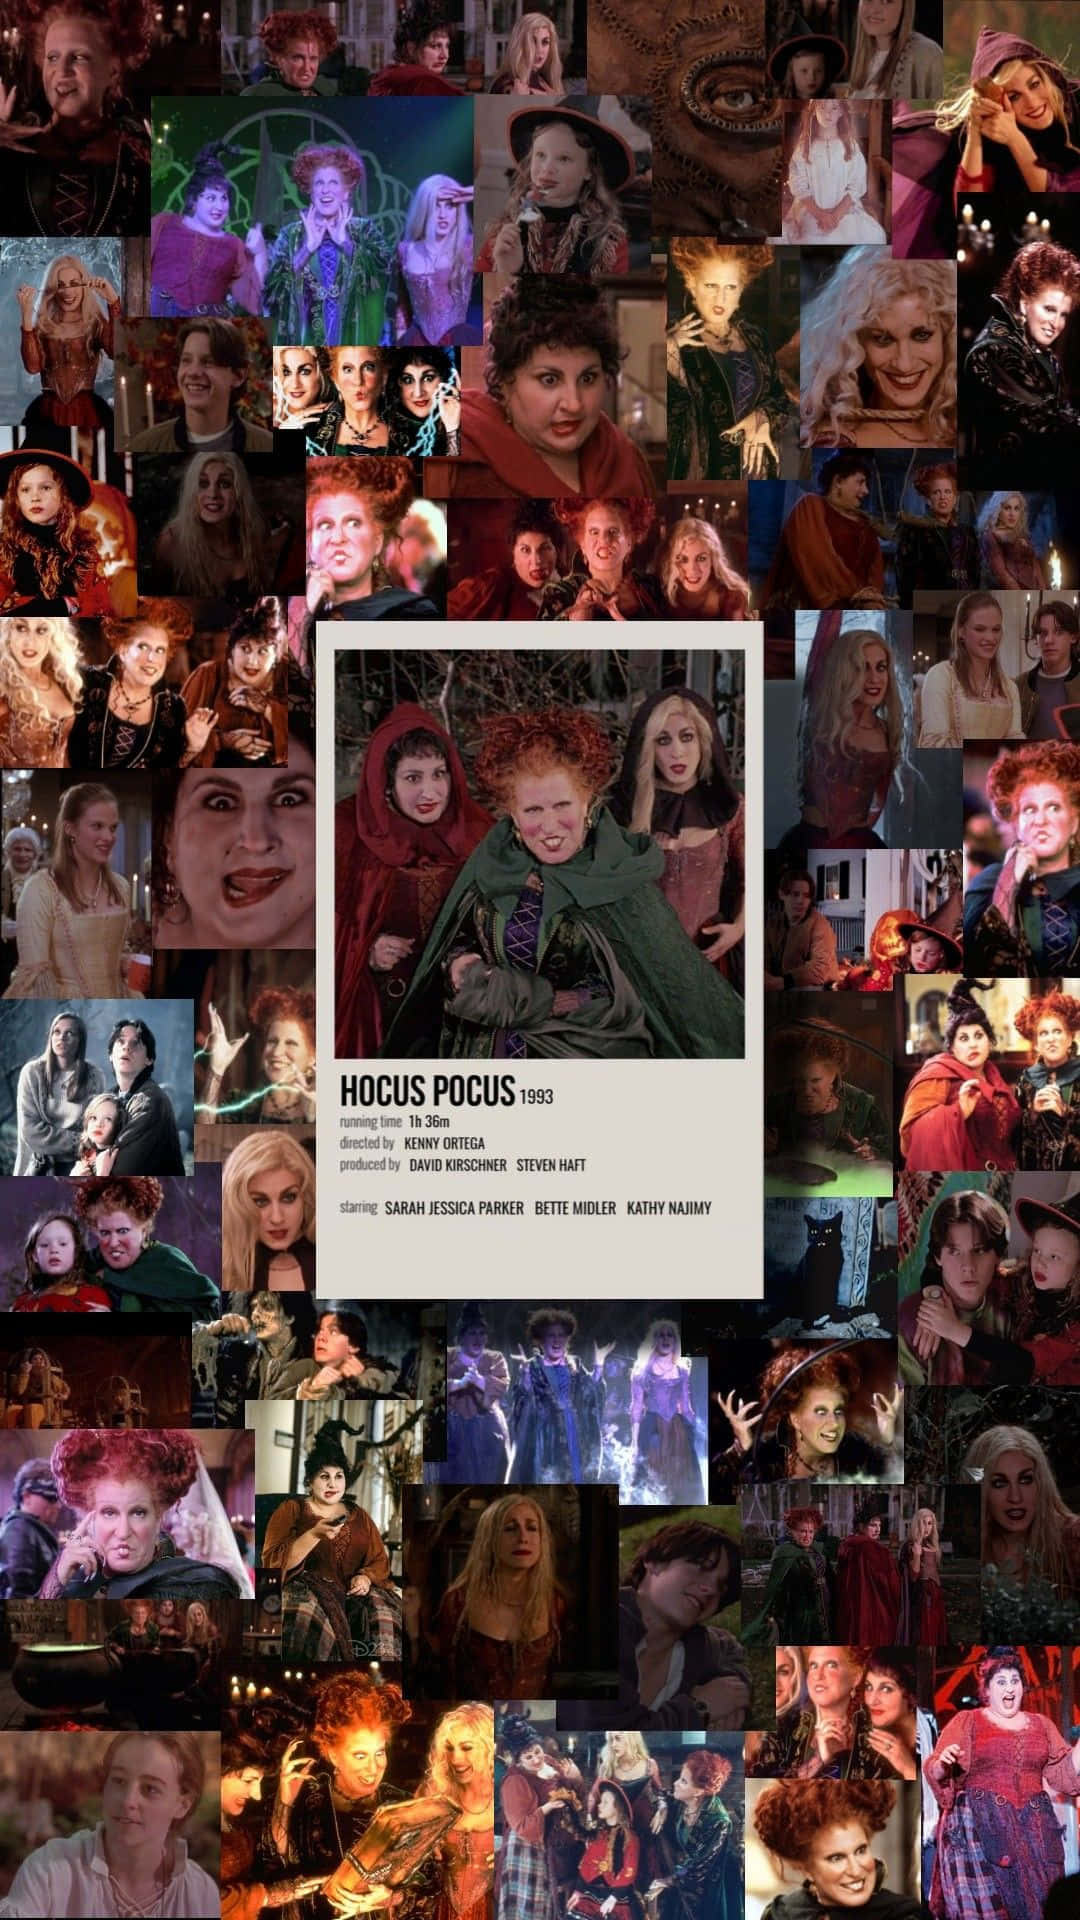 Celebrate Halloween with Hocus Pocus and an Iphone Wallpaper